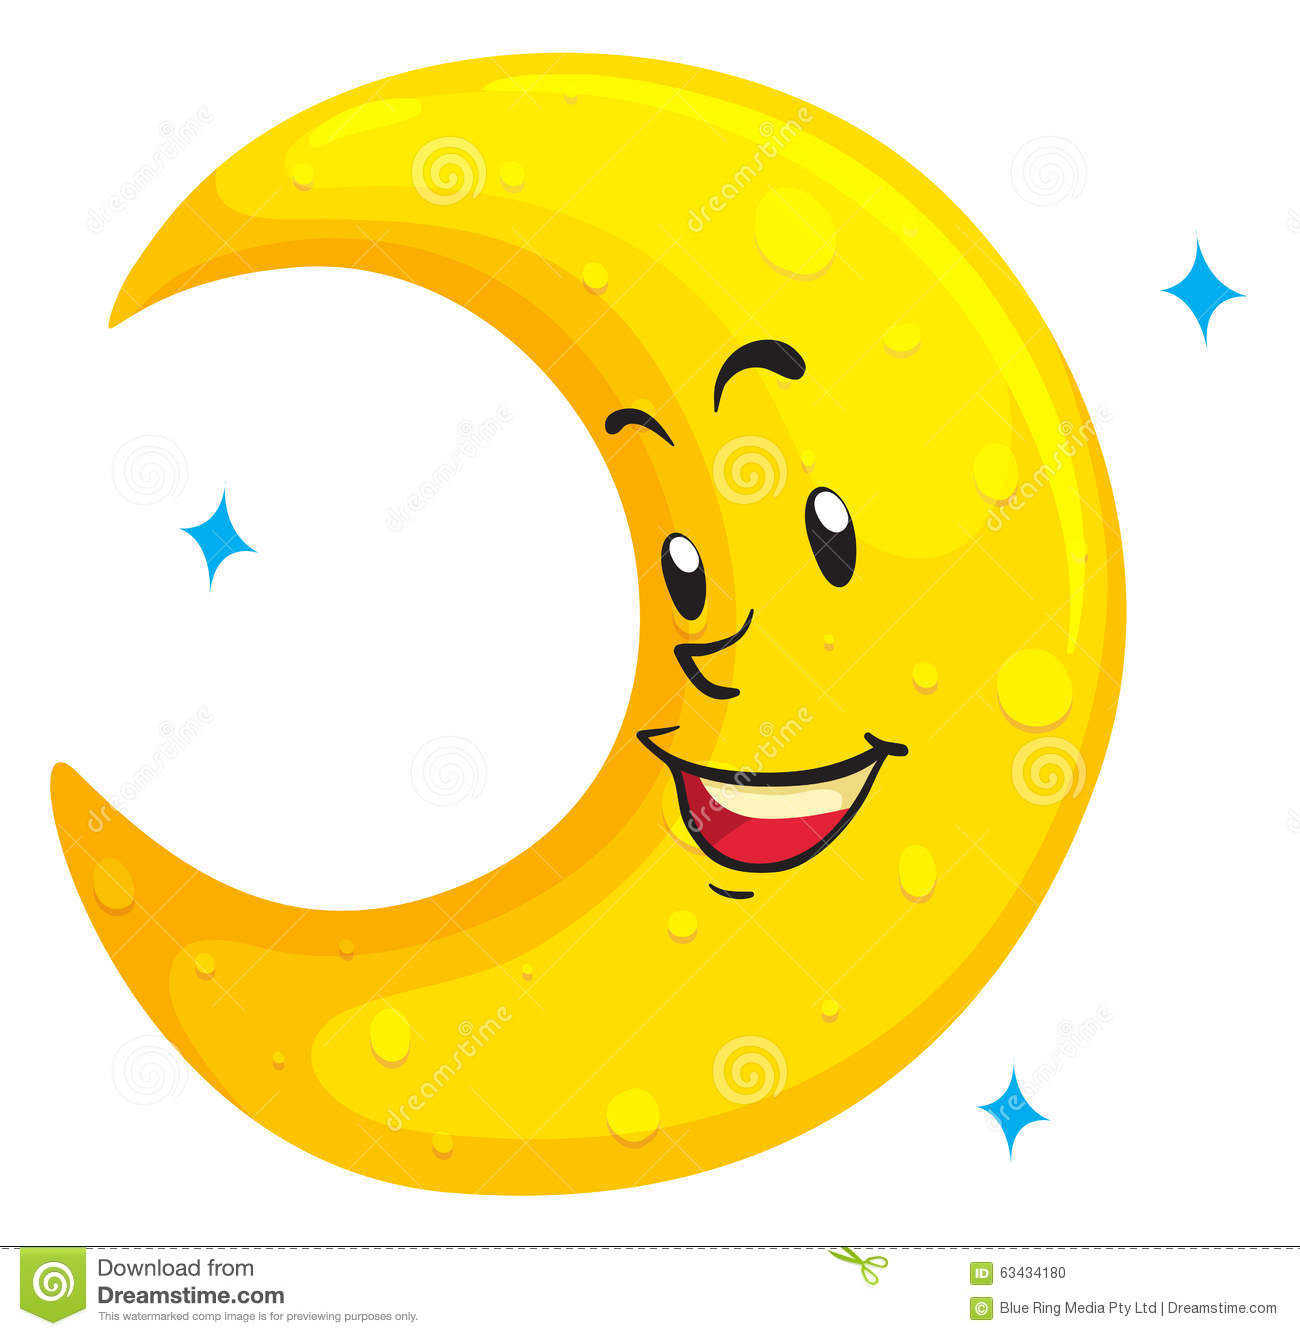 Mond clipart #7, Download drawings